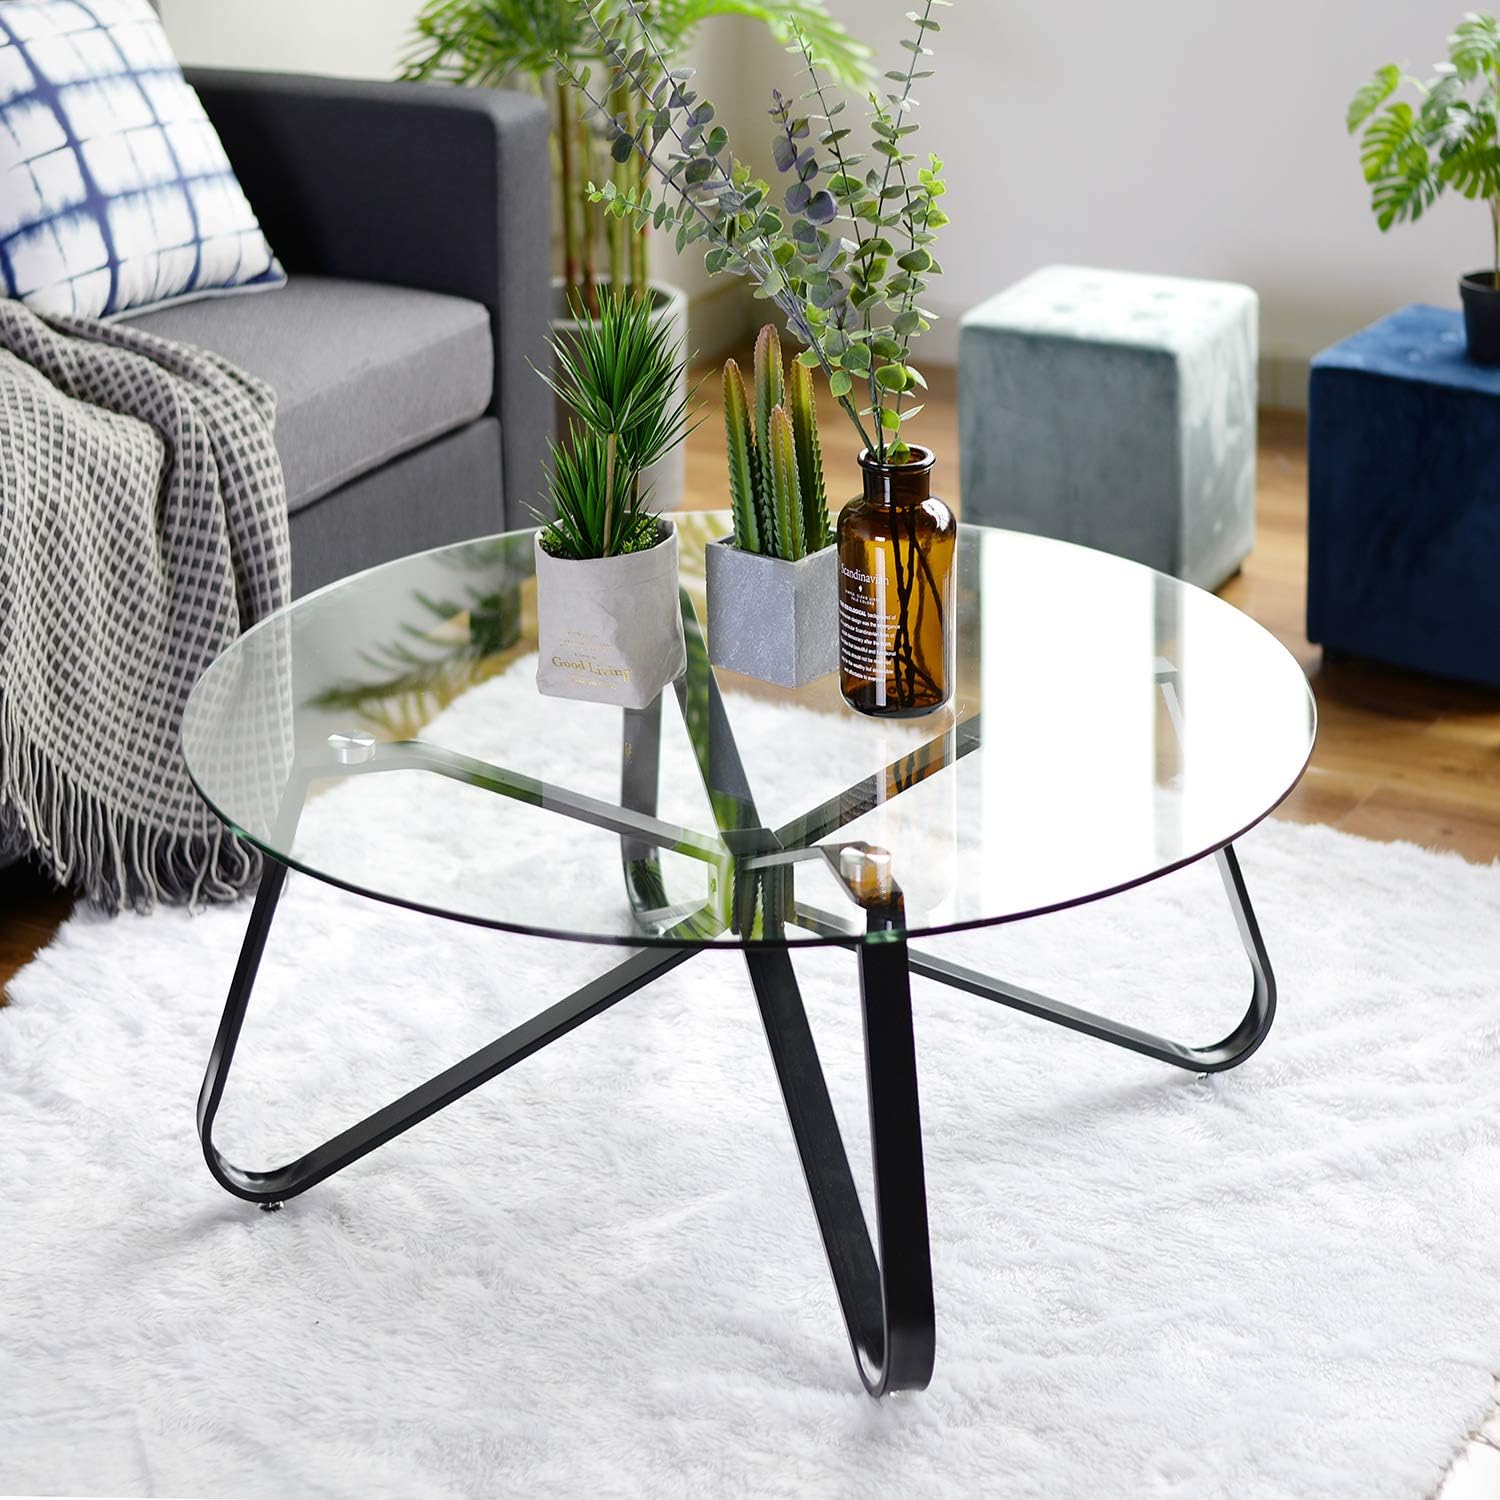 Tempered Glass Top Black Metal Center Tables Small Circle Modern for Living Room